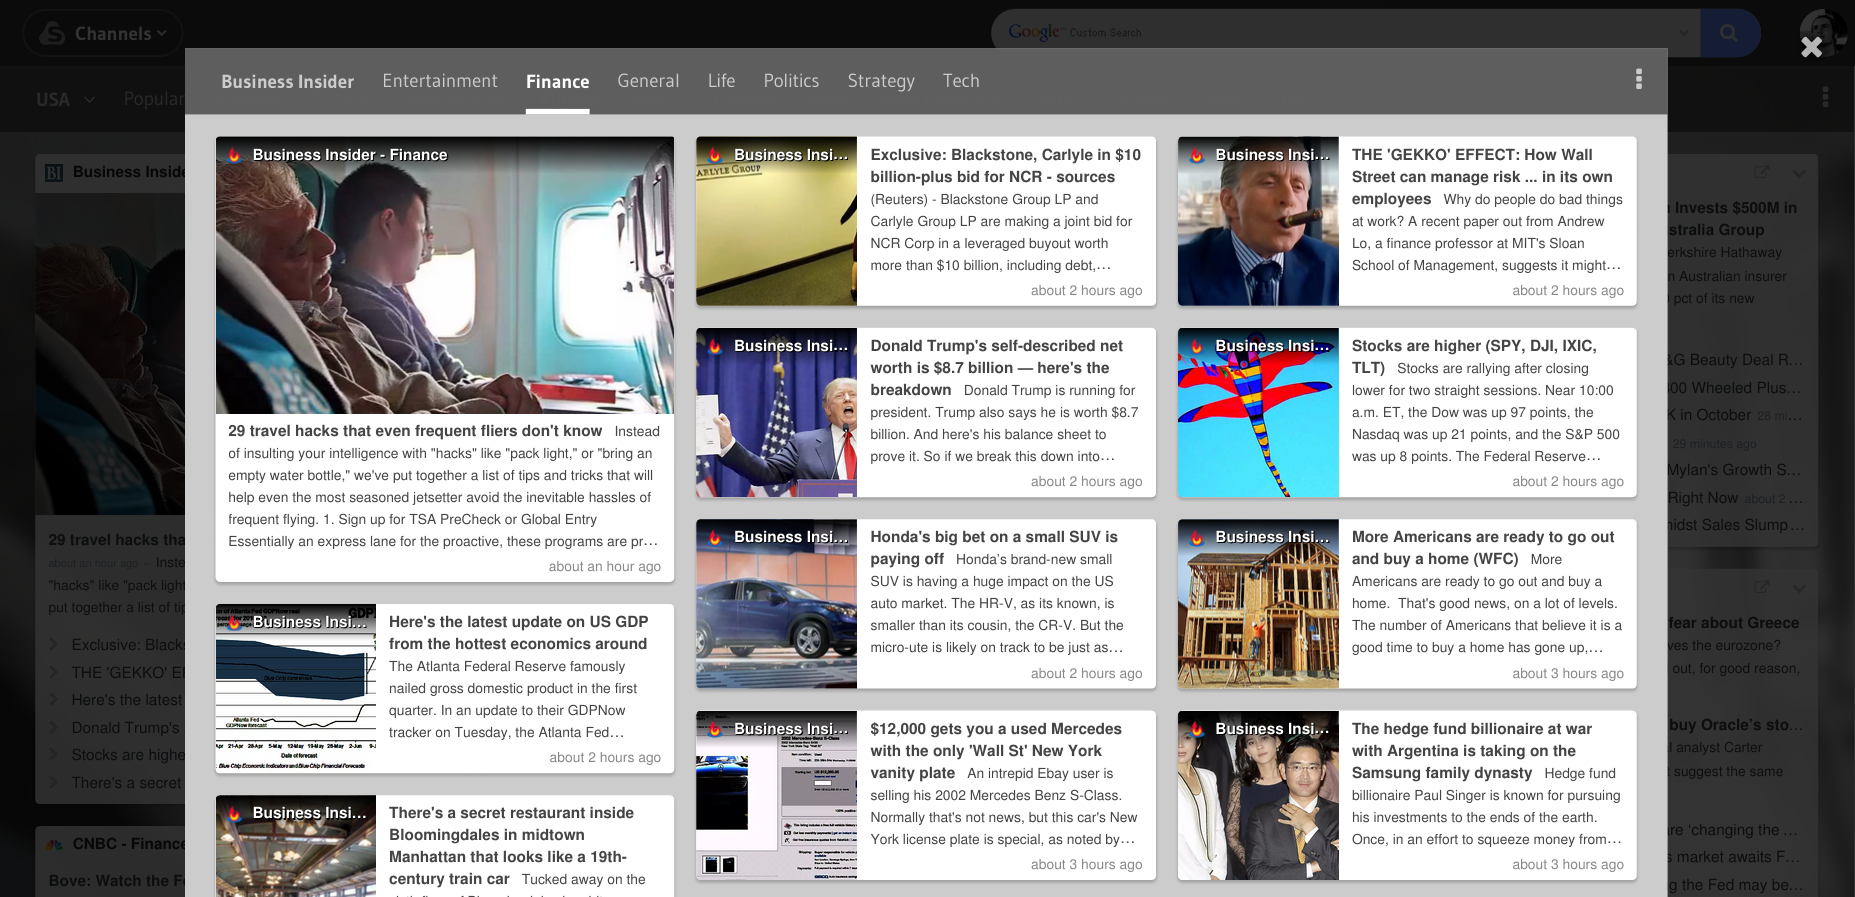 rss feed reader free